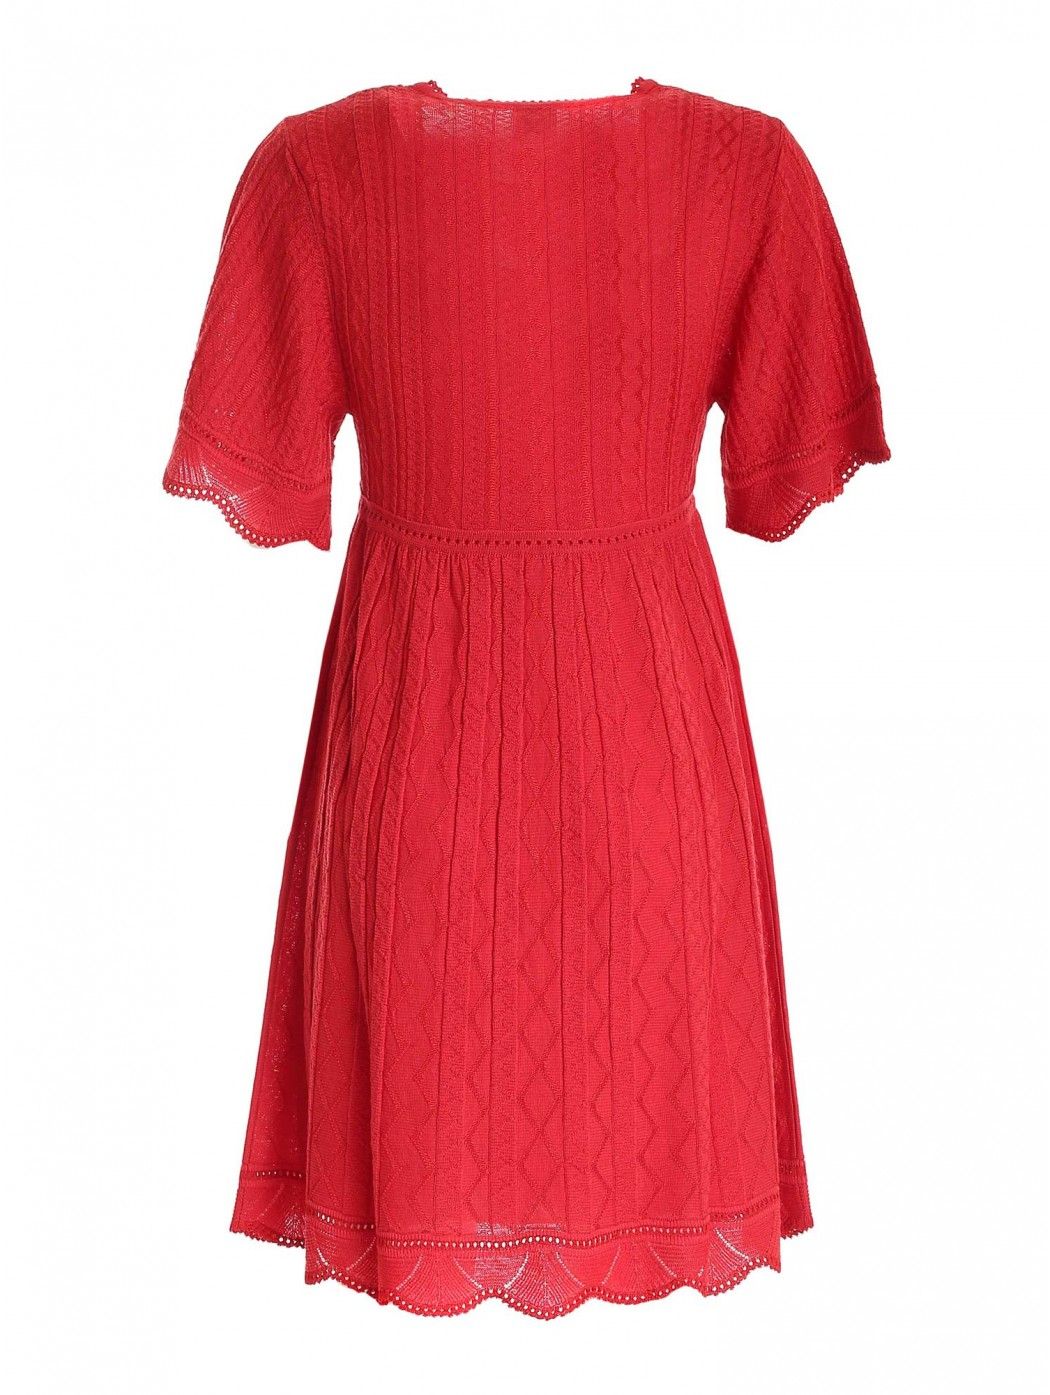 Viscose and wool dress Color: red V-neck Perforated finishes Removable slip  M MISSONI